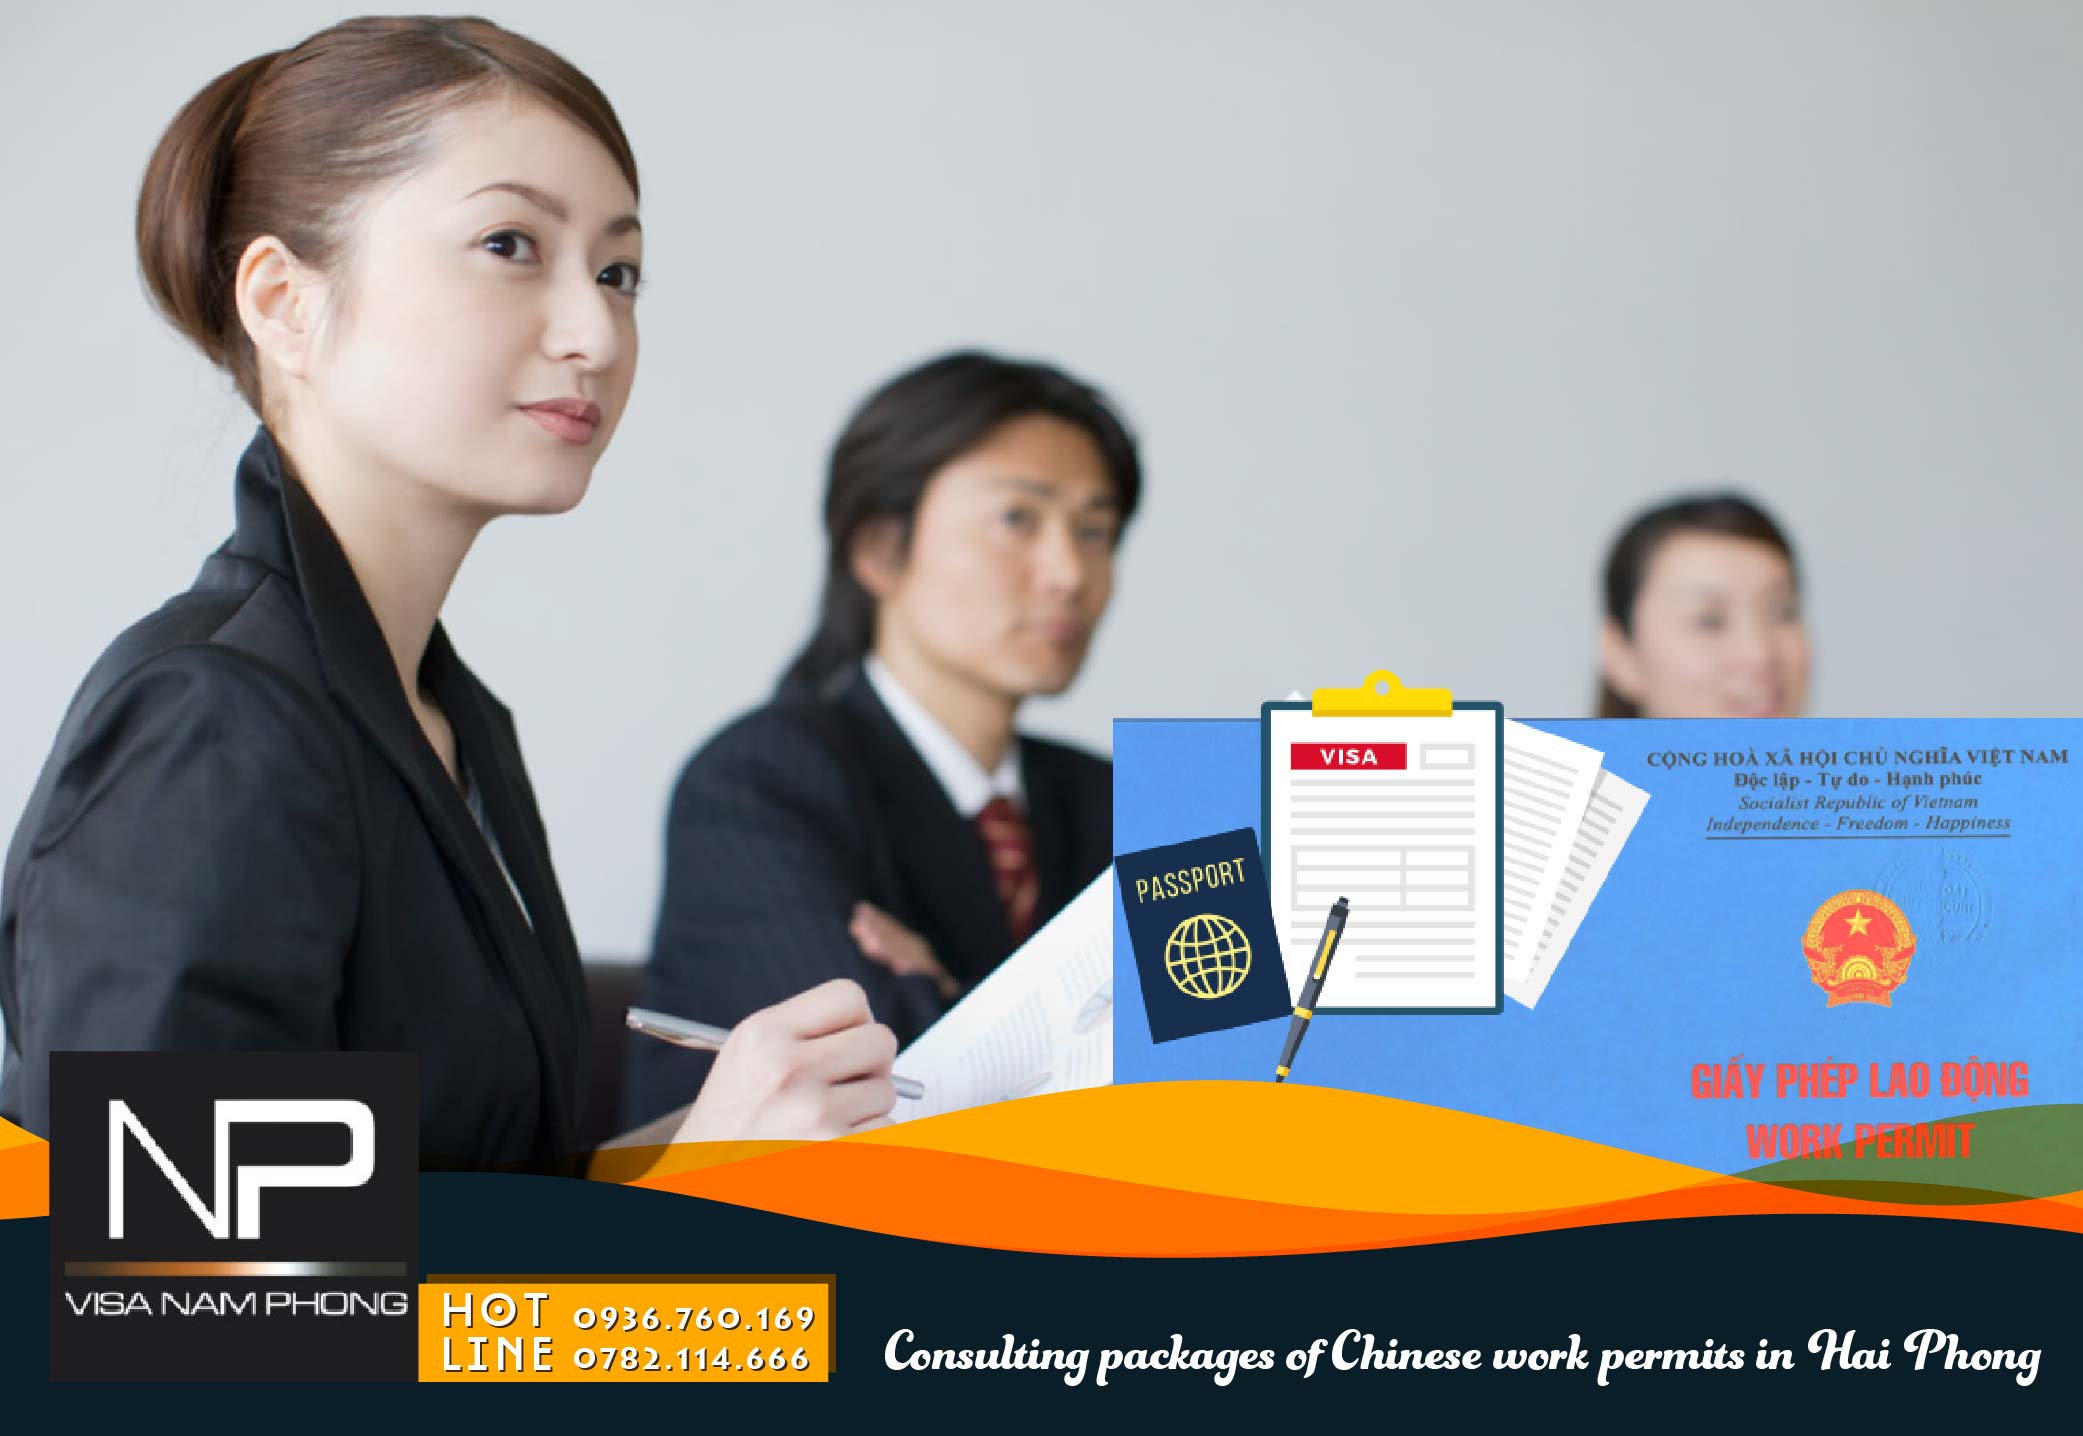 Consulting packages of Chinese work permits in Hai Phong